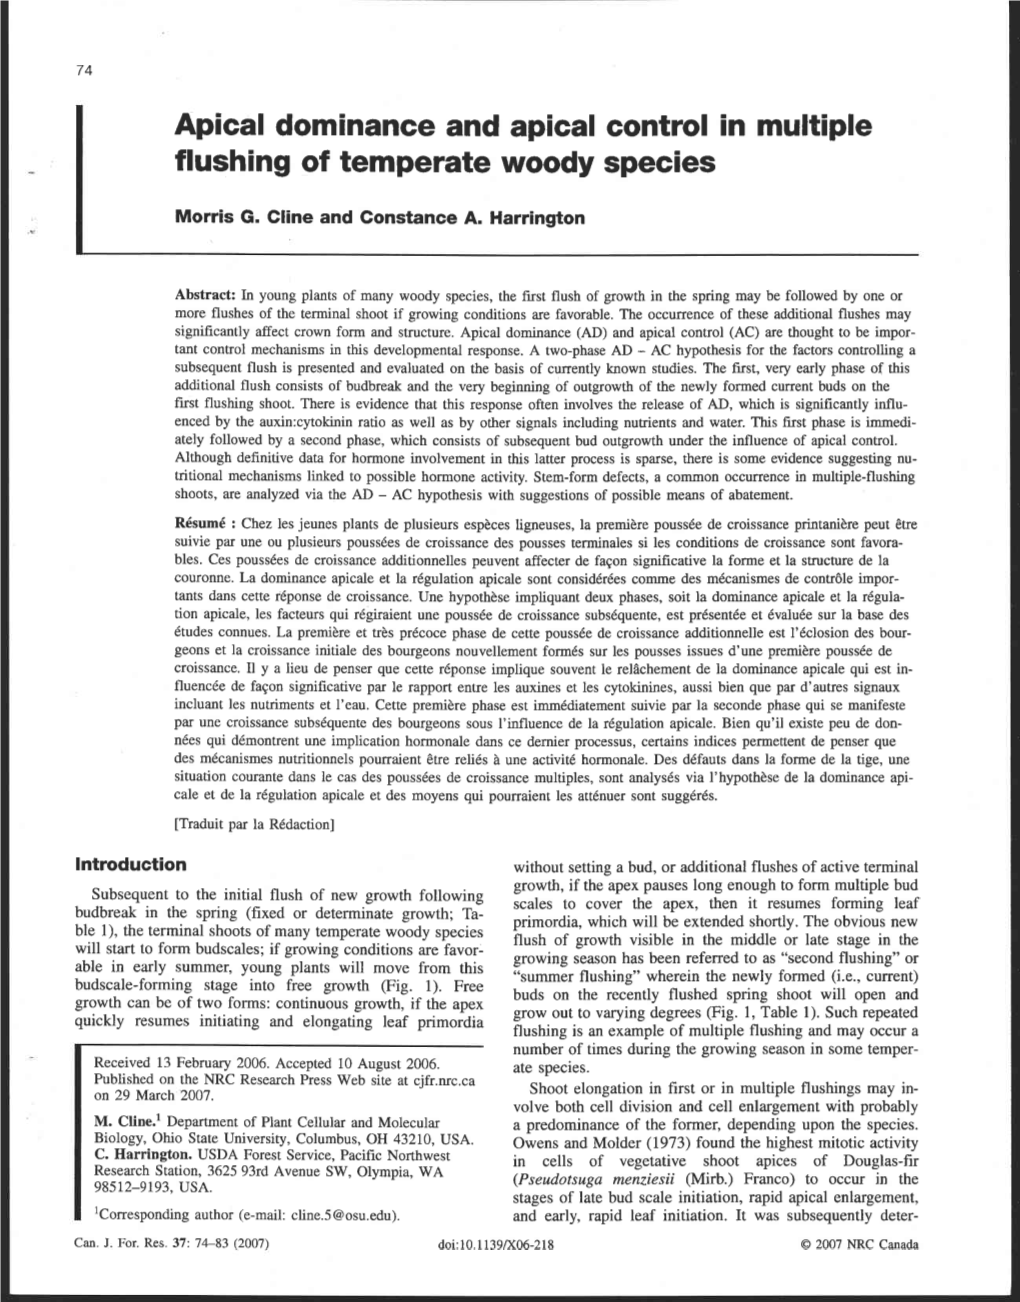 Apical Dominance and Apical Control in Multiple Flushing of Temperate Woody Species